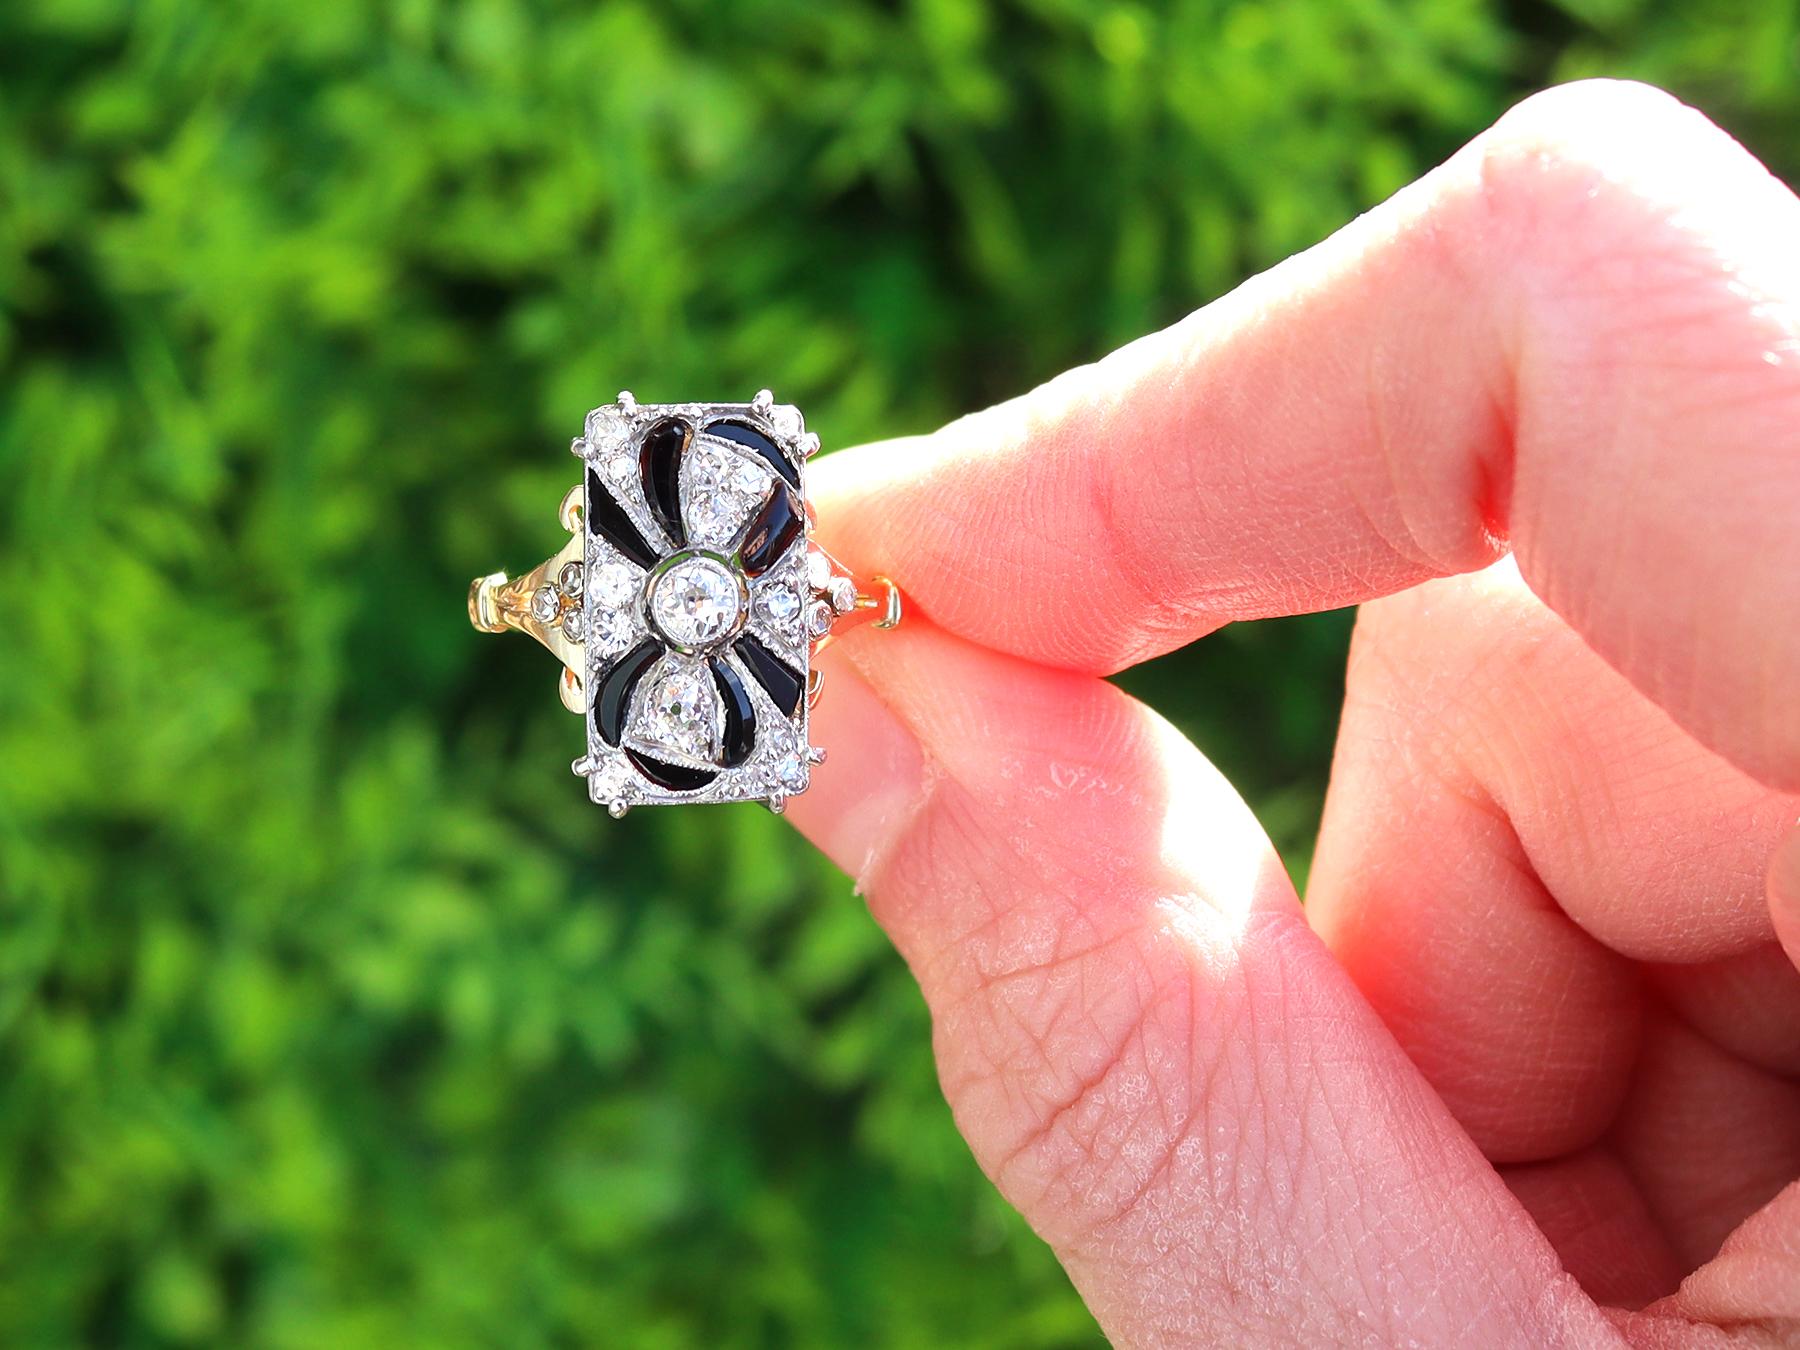 A stunning, fine and impressive antique 0.80 carat black onyx and 0.46 carat diamond, 18 karat yellow gold and platinum set Art Deco dress ring; part of our diverse antique jewellery and estate jewelry collections.

This stunning, fine and